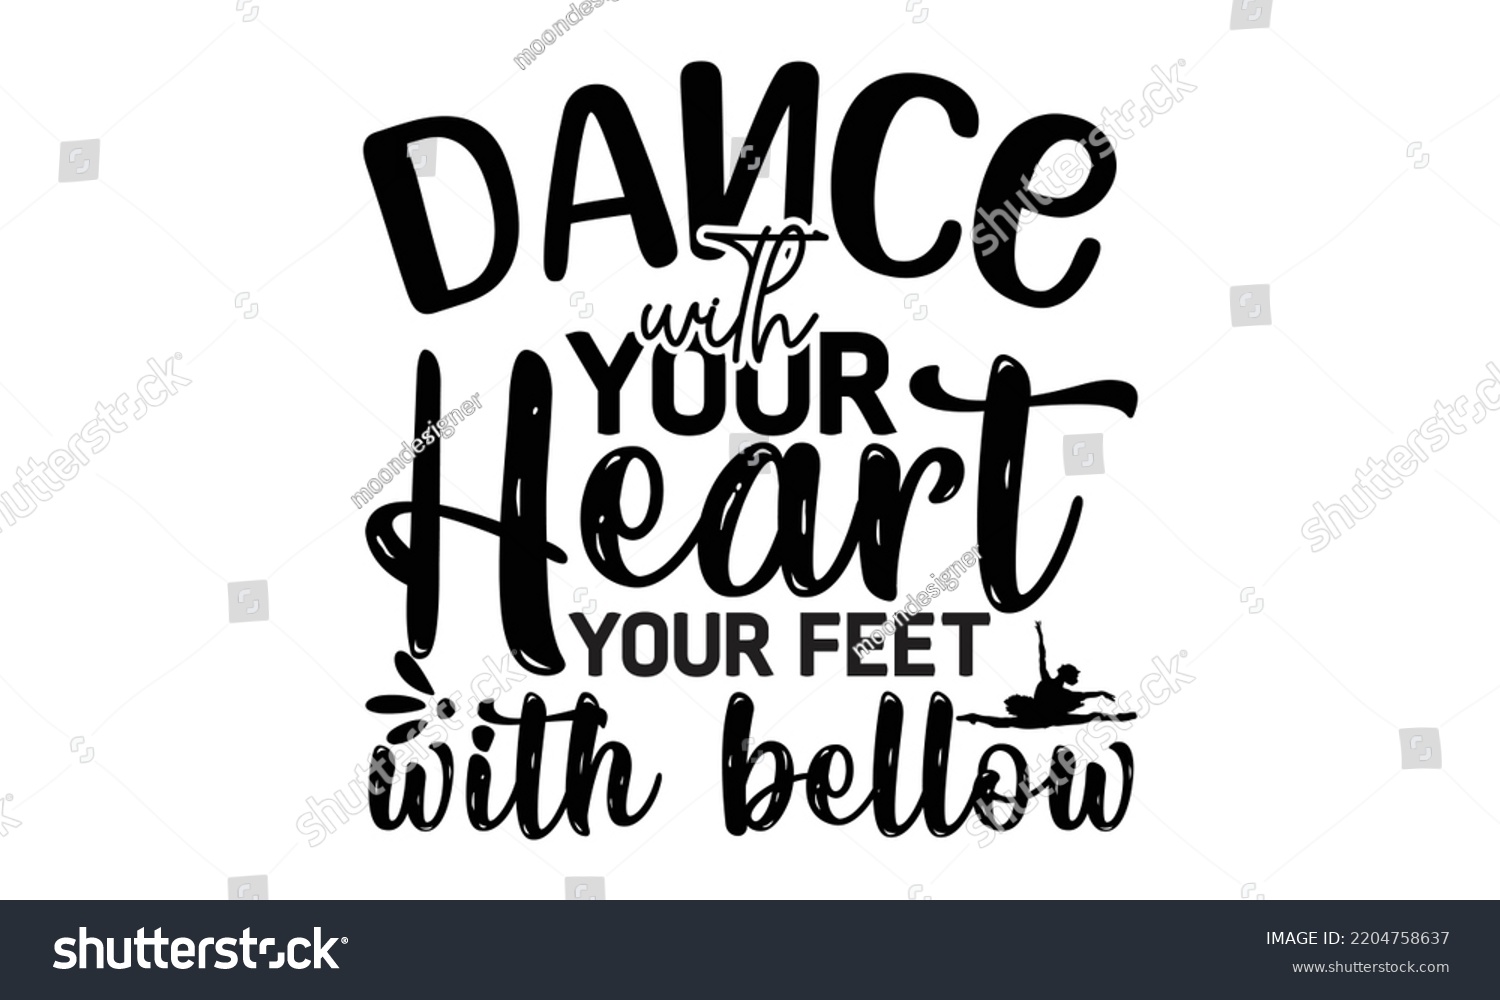 SVG of Dance with your heart your feet with bellow - Ballet svg t shirt design, ballet SVG Cut Files, Girl Ballet Design, Hand drawn lettering phrase and vector sign, EPS 10 svg